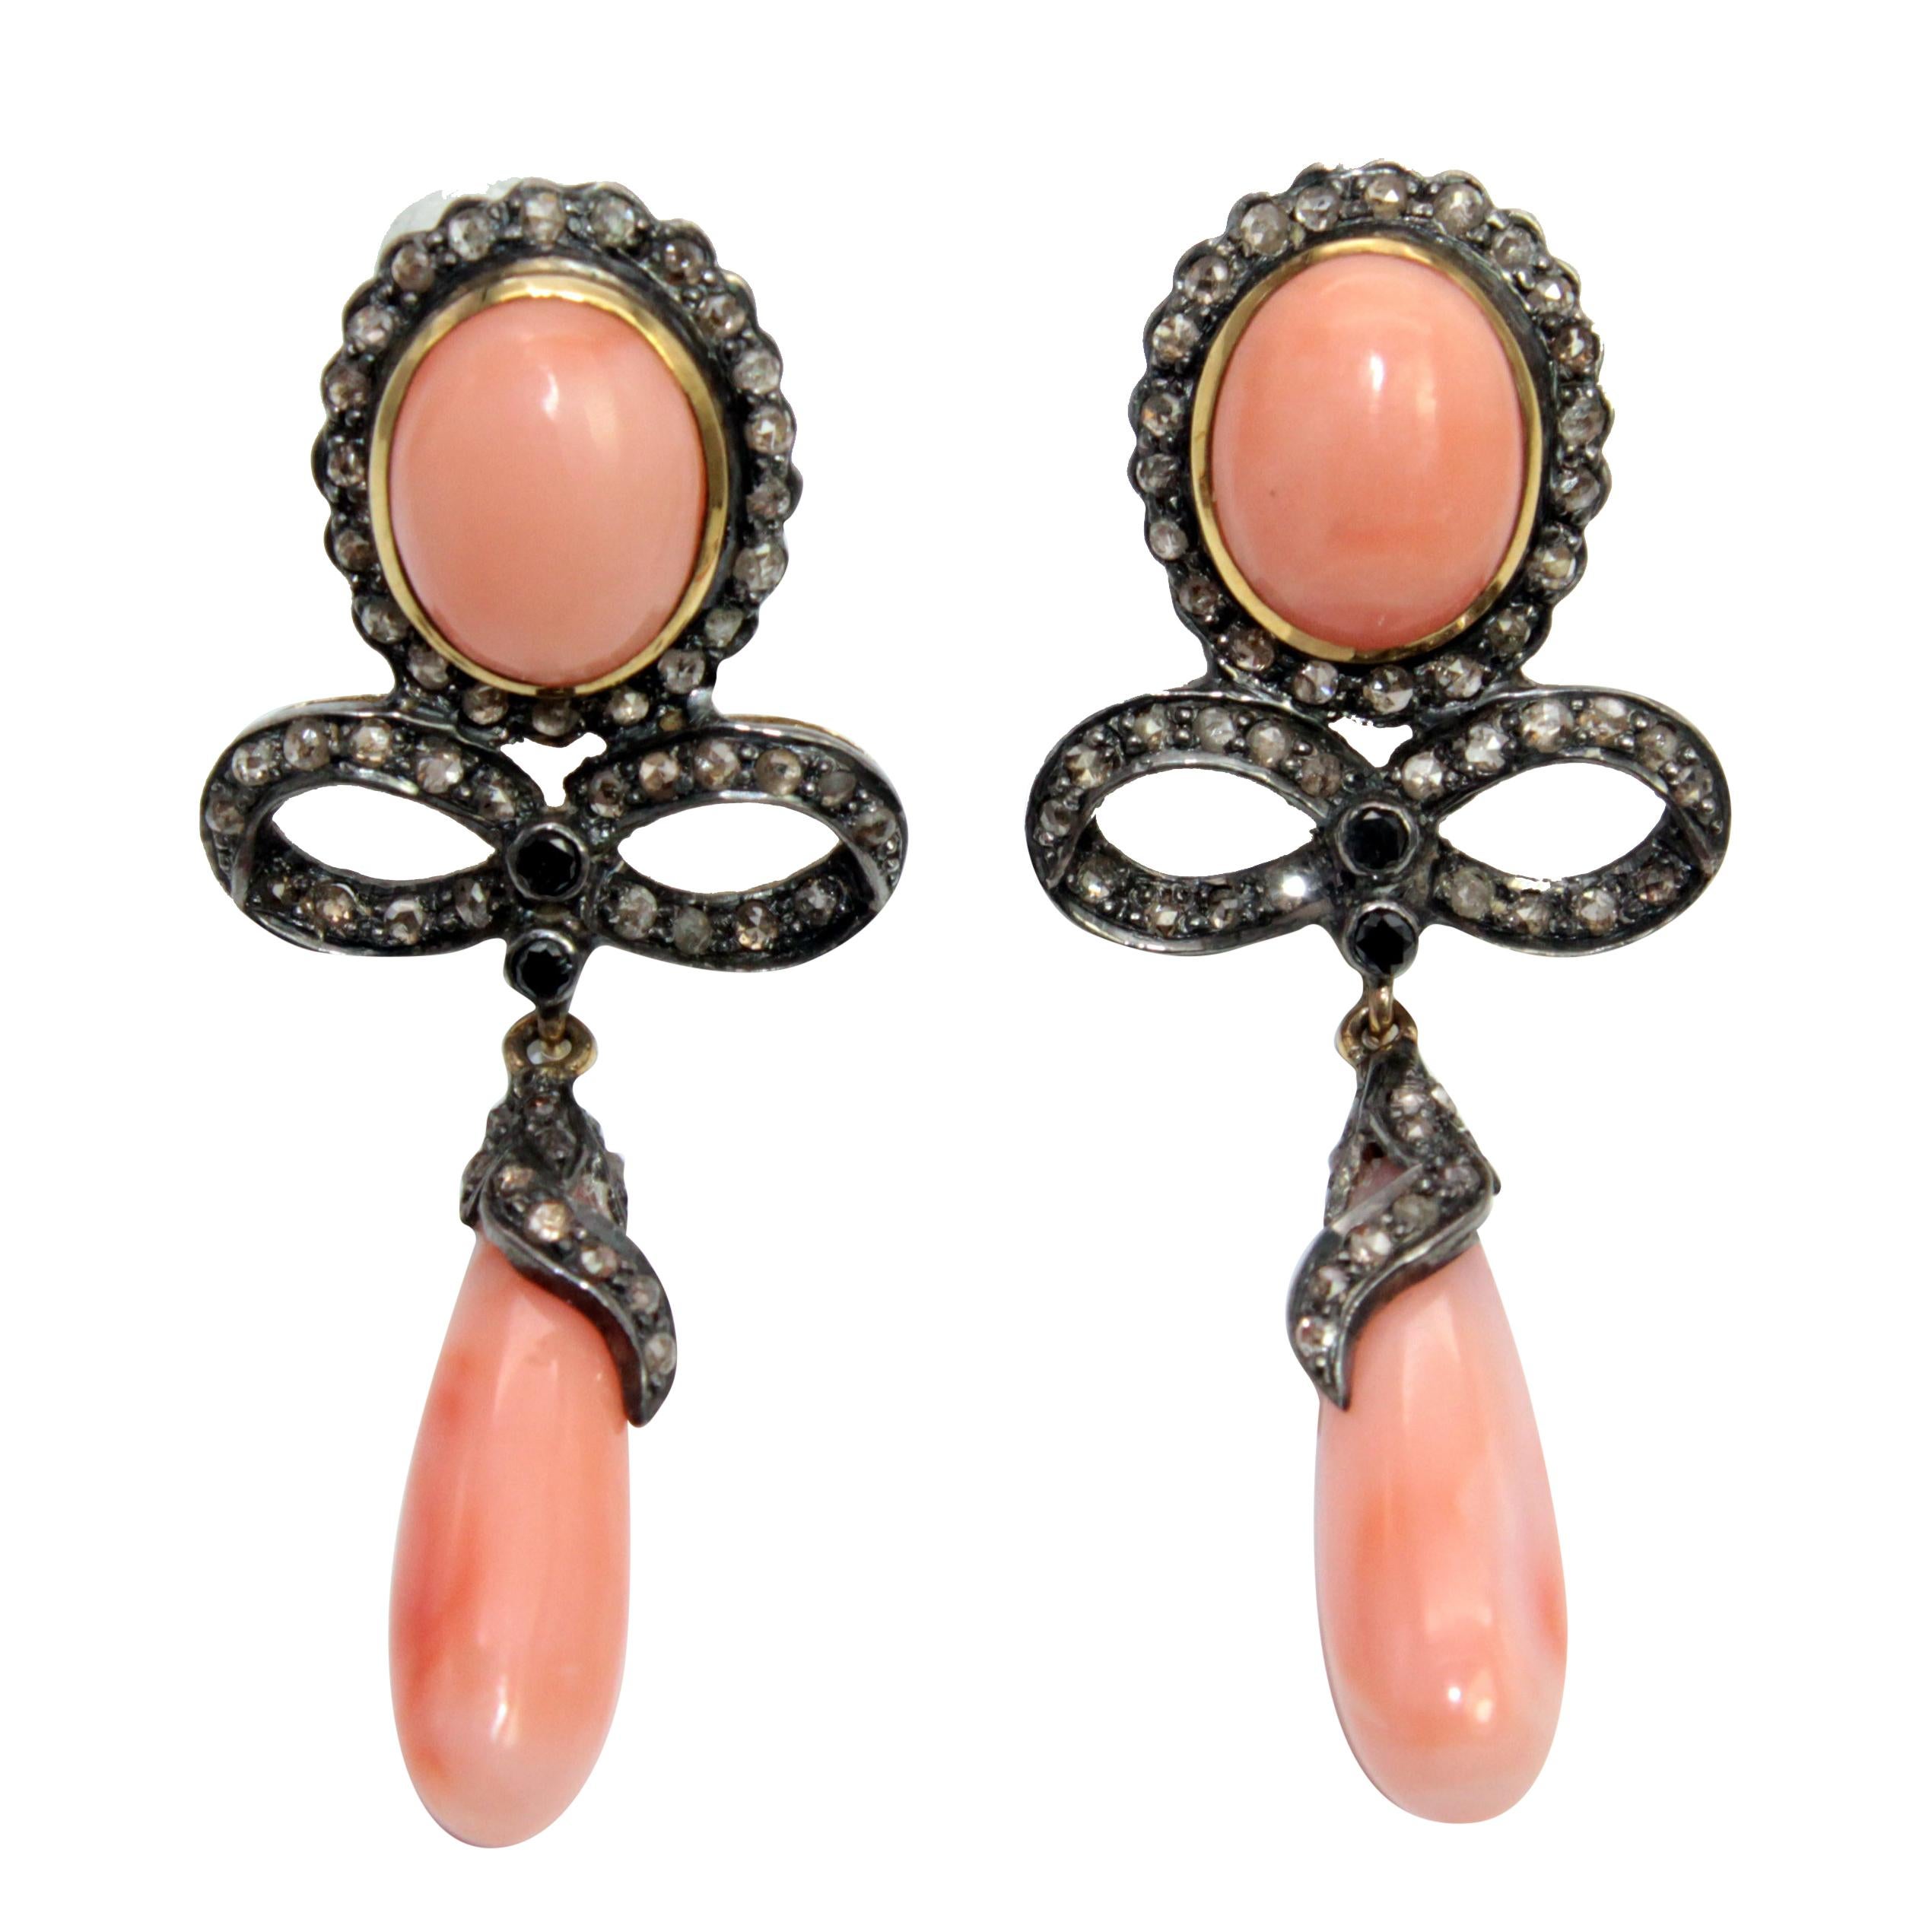 Pendant Earrings with Pink Coral